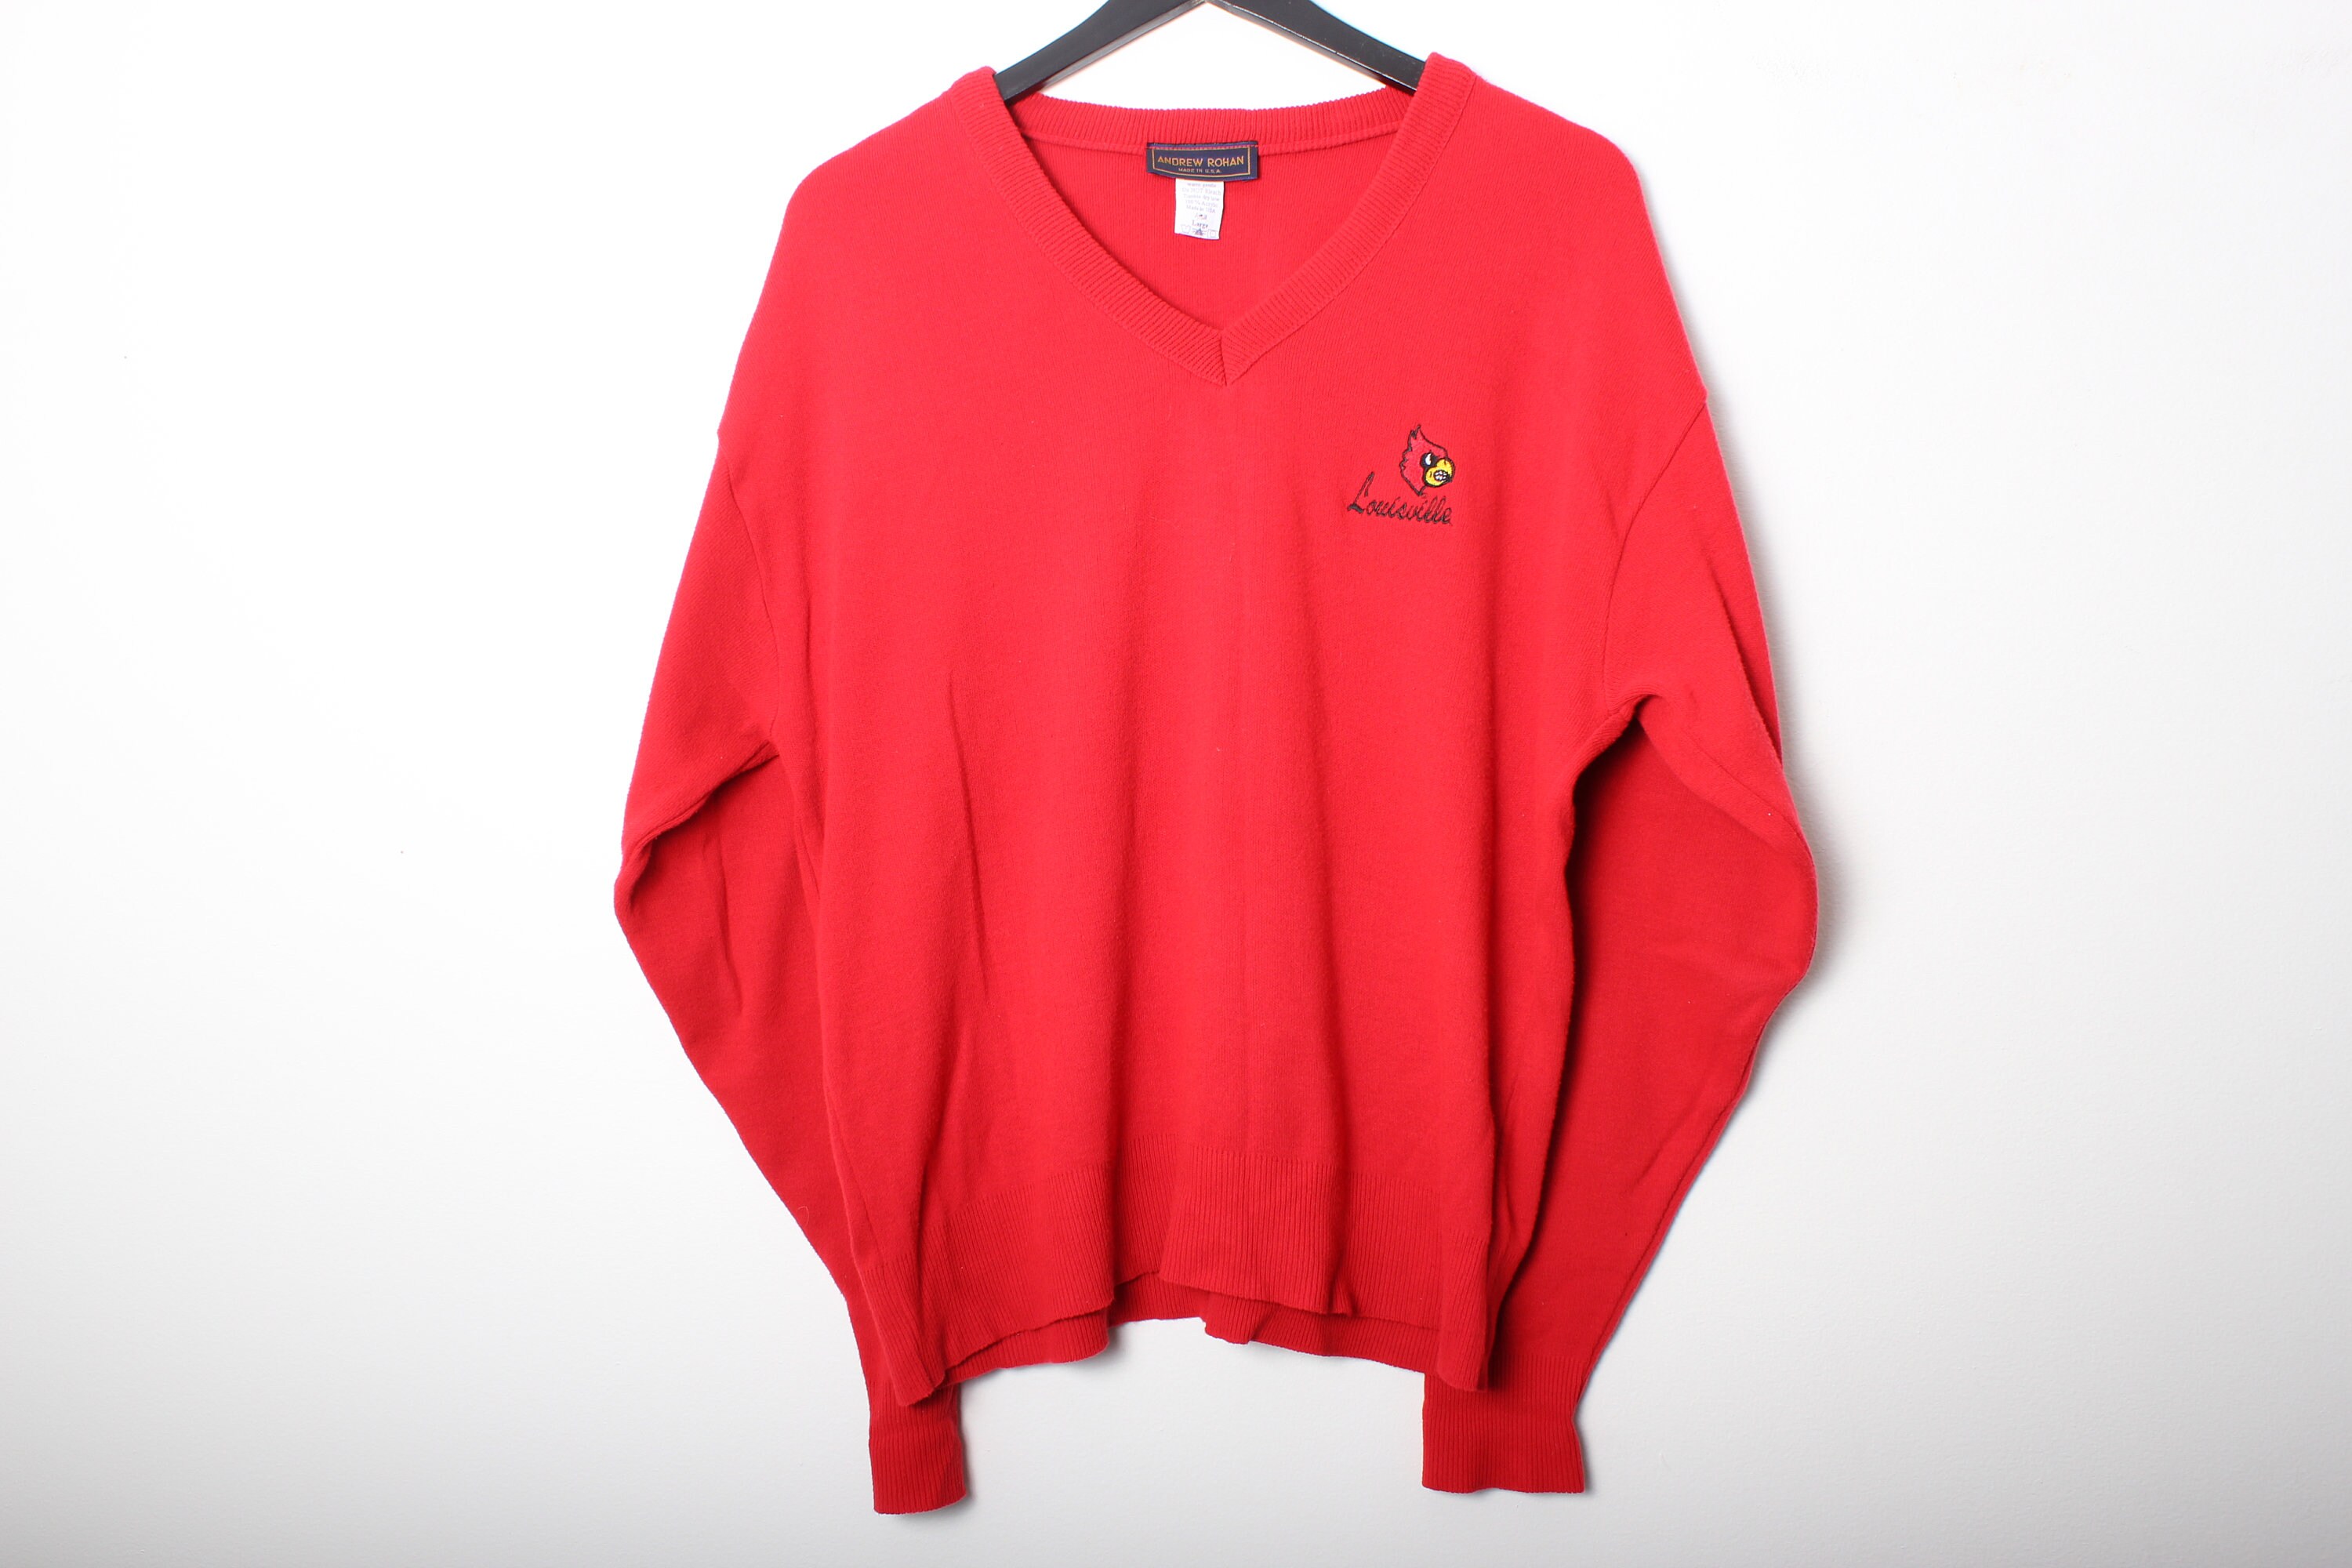 Vintage 70s Womens Medium Spell Out University of Louisville Knit Sweater  Red